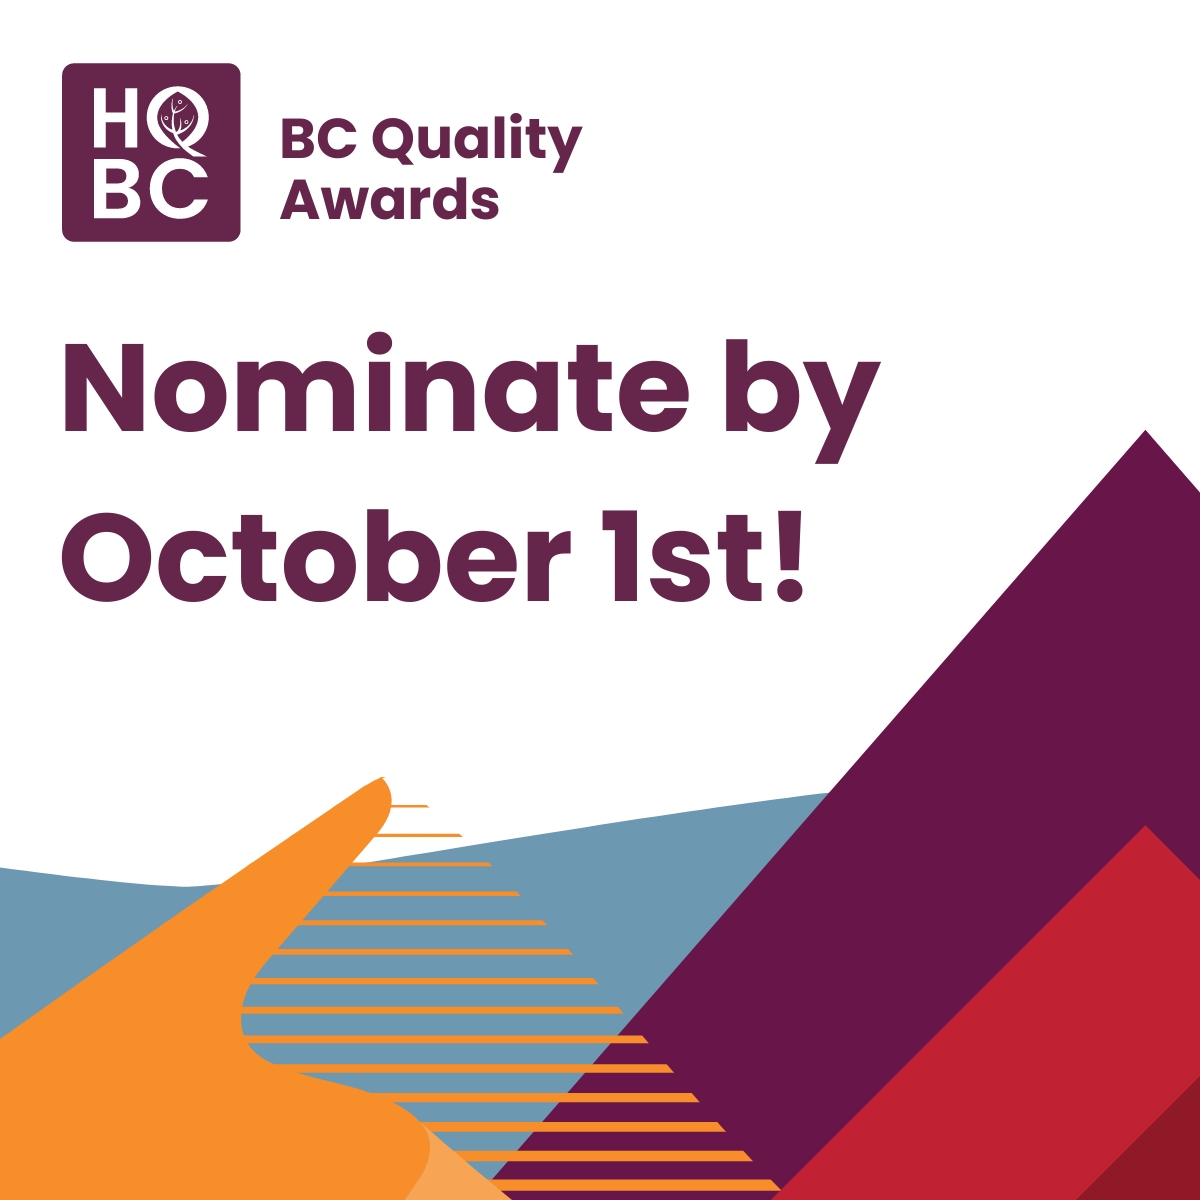 BC Quality Awards Social Graphic - Nominate by October 1st.jpg